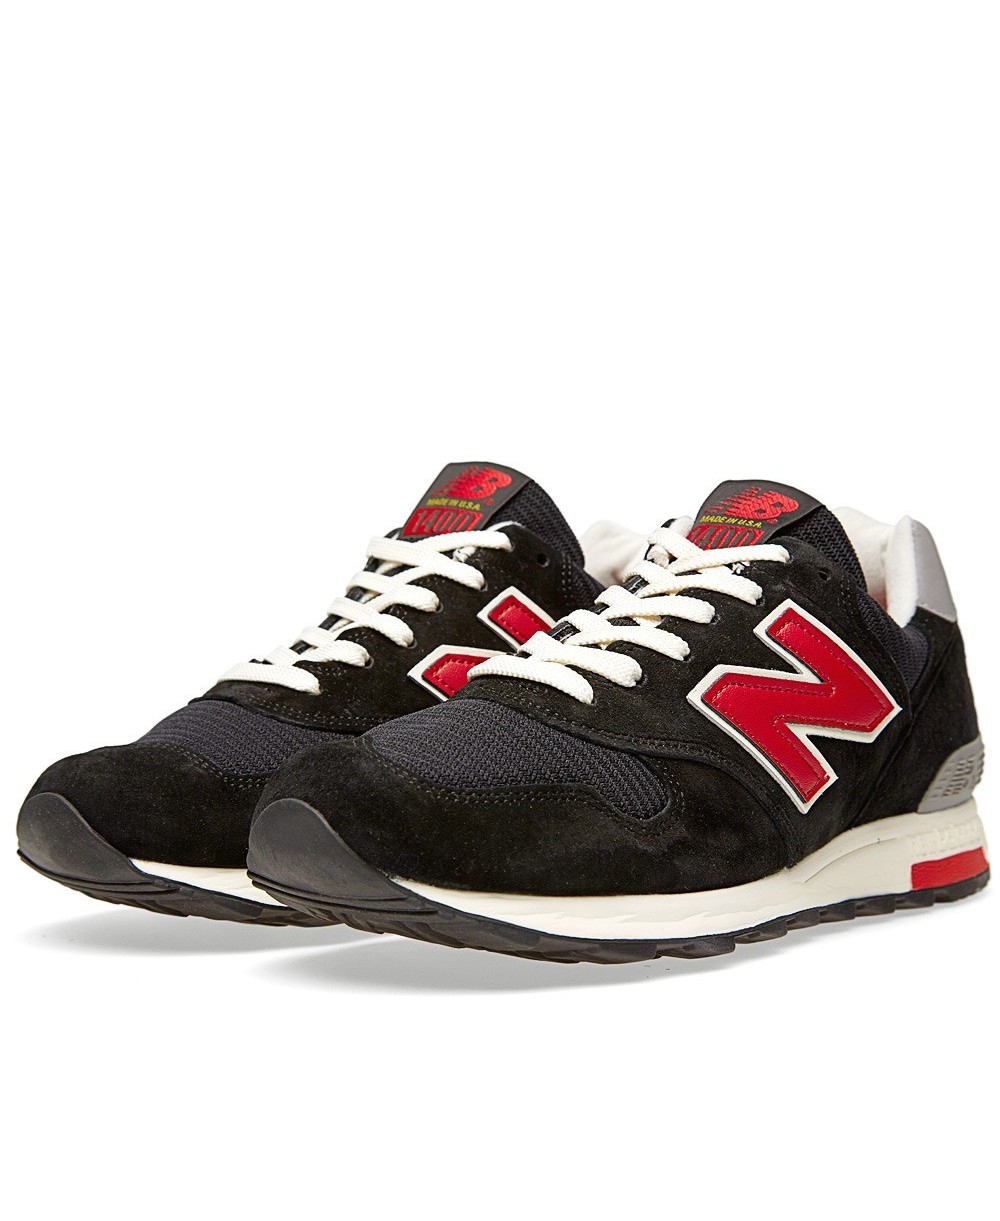 mens new balance made in usa